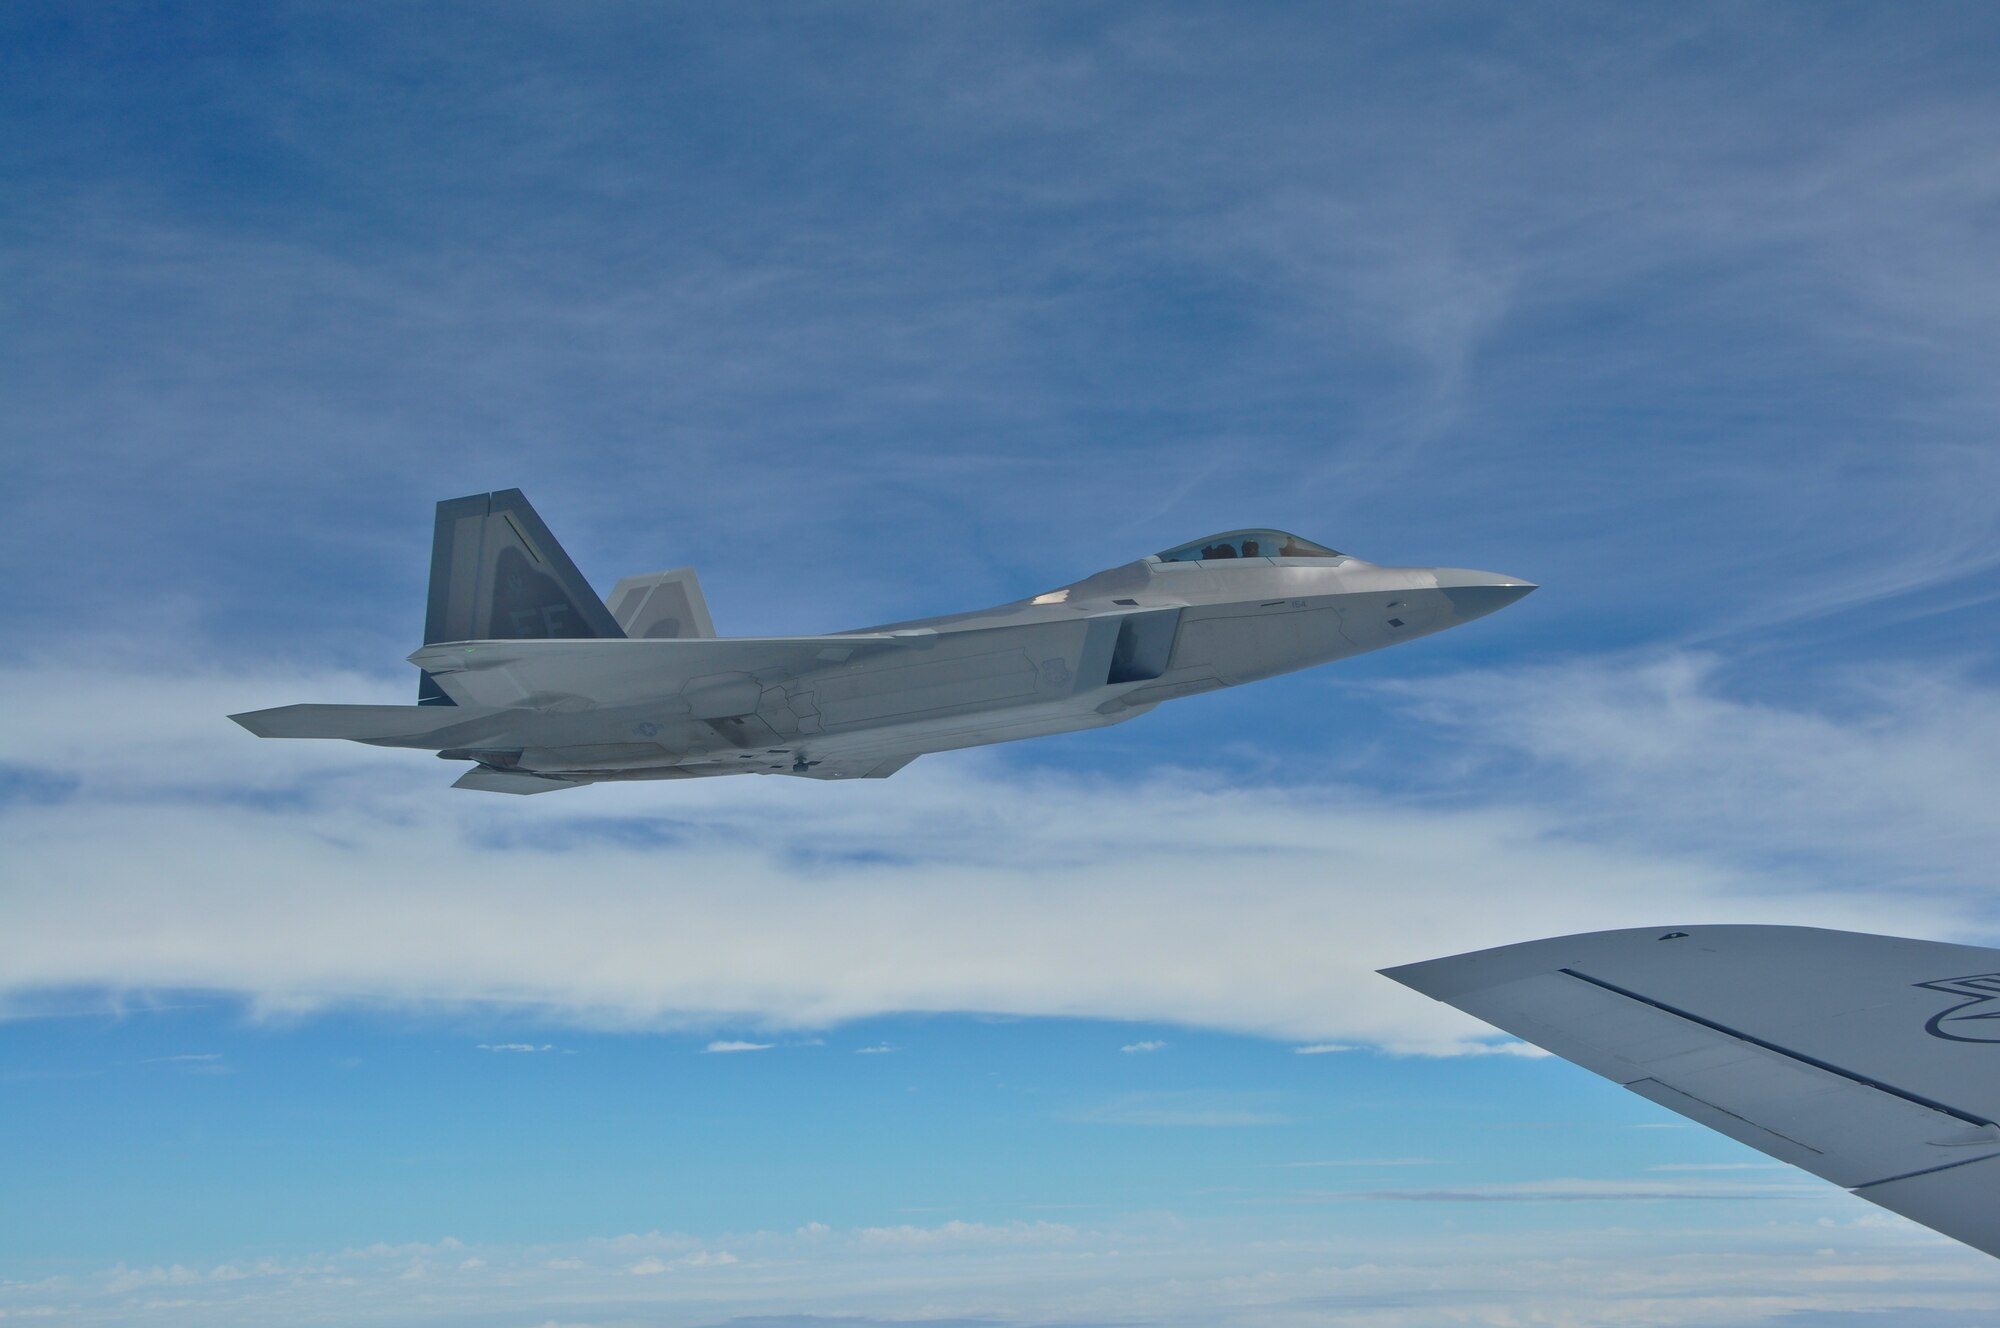 A pair of F-22 Raptors  practice refueling from a KC-135 Stratotanker on June 28, 2010. The F-22's were returning to Air Combat Command after participating in a joint training exercise with the 128th Air Refueling Wing.(US Air Force Photo by SSgt Jeremy Wilson / Released)